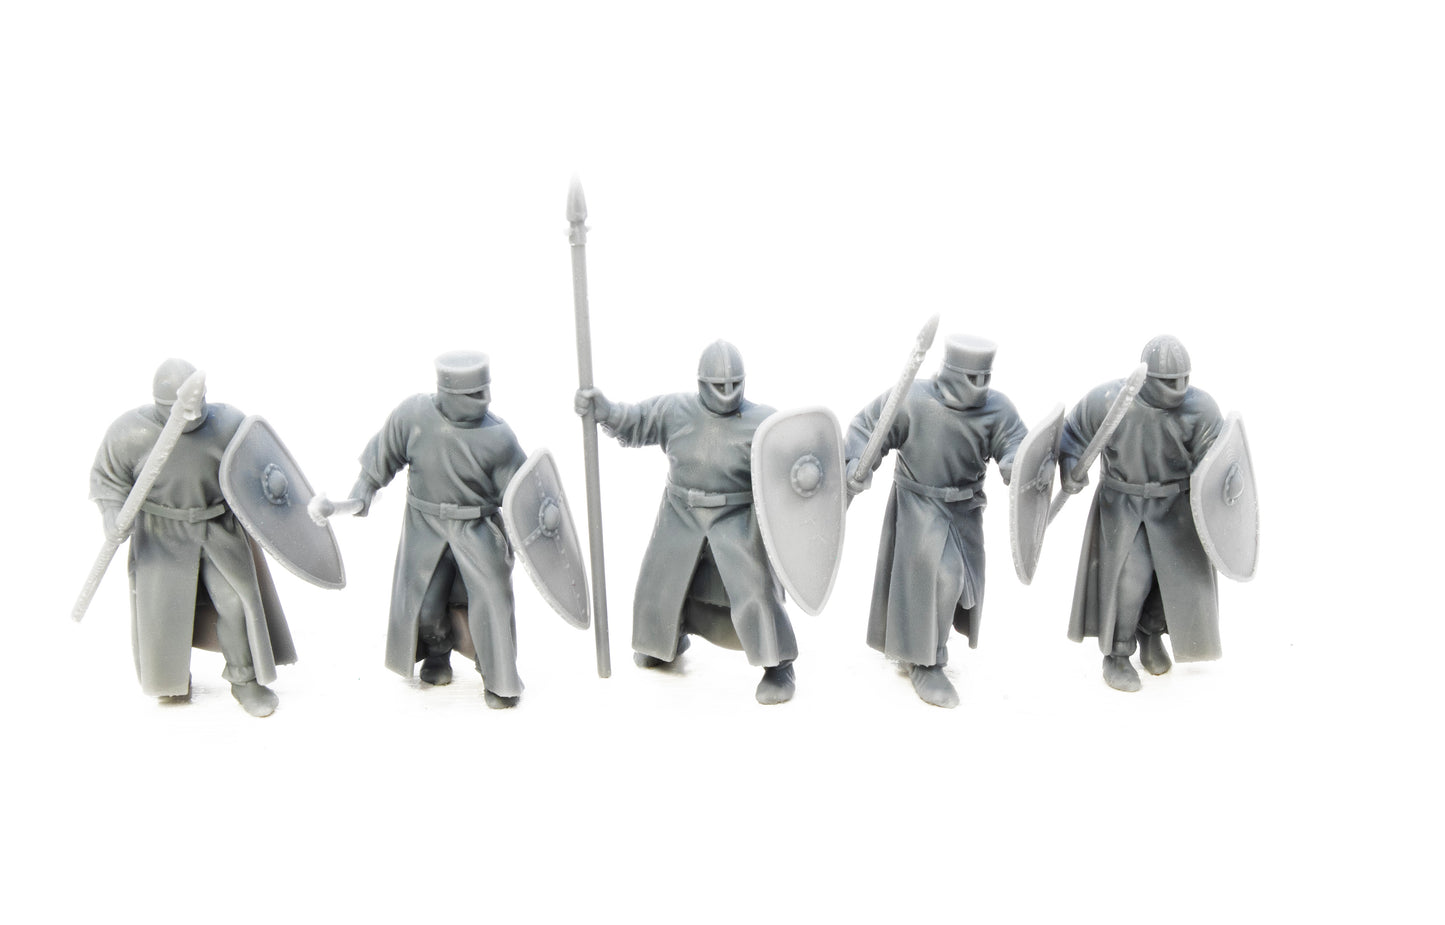 13th century Teutonic Sergeants on foot by Black Knight Miniatures